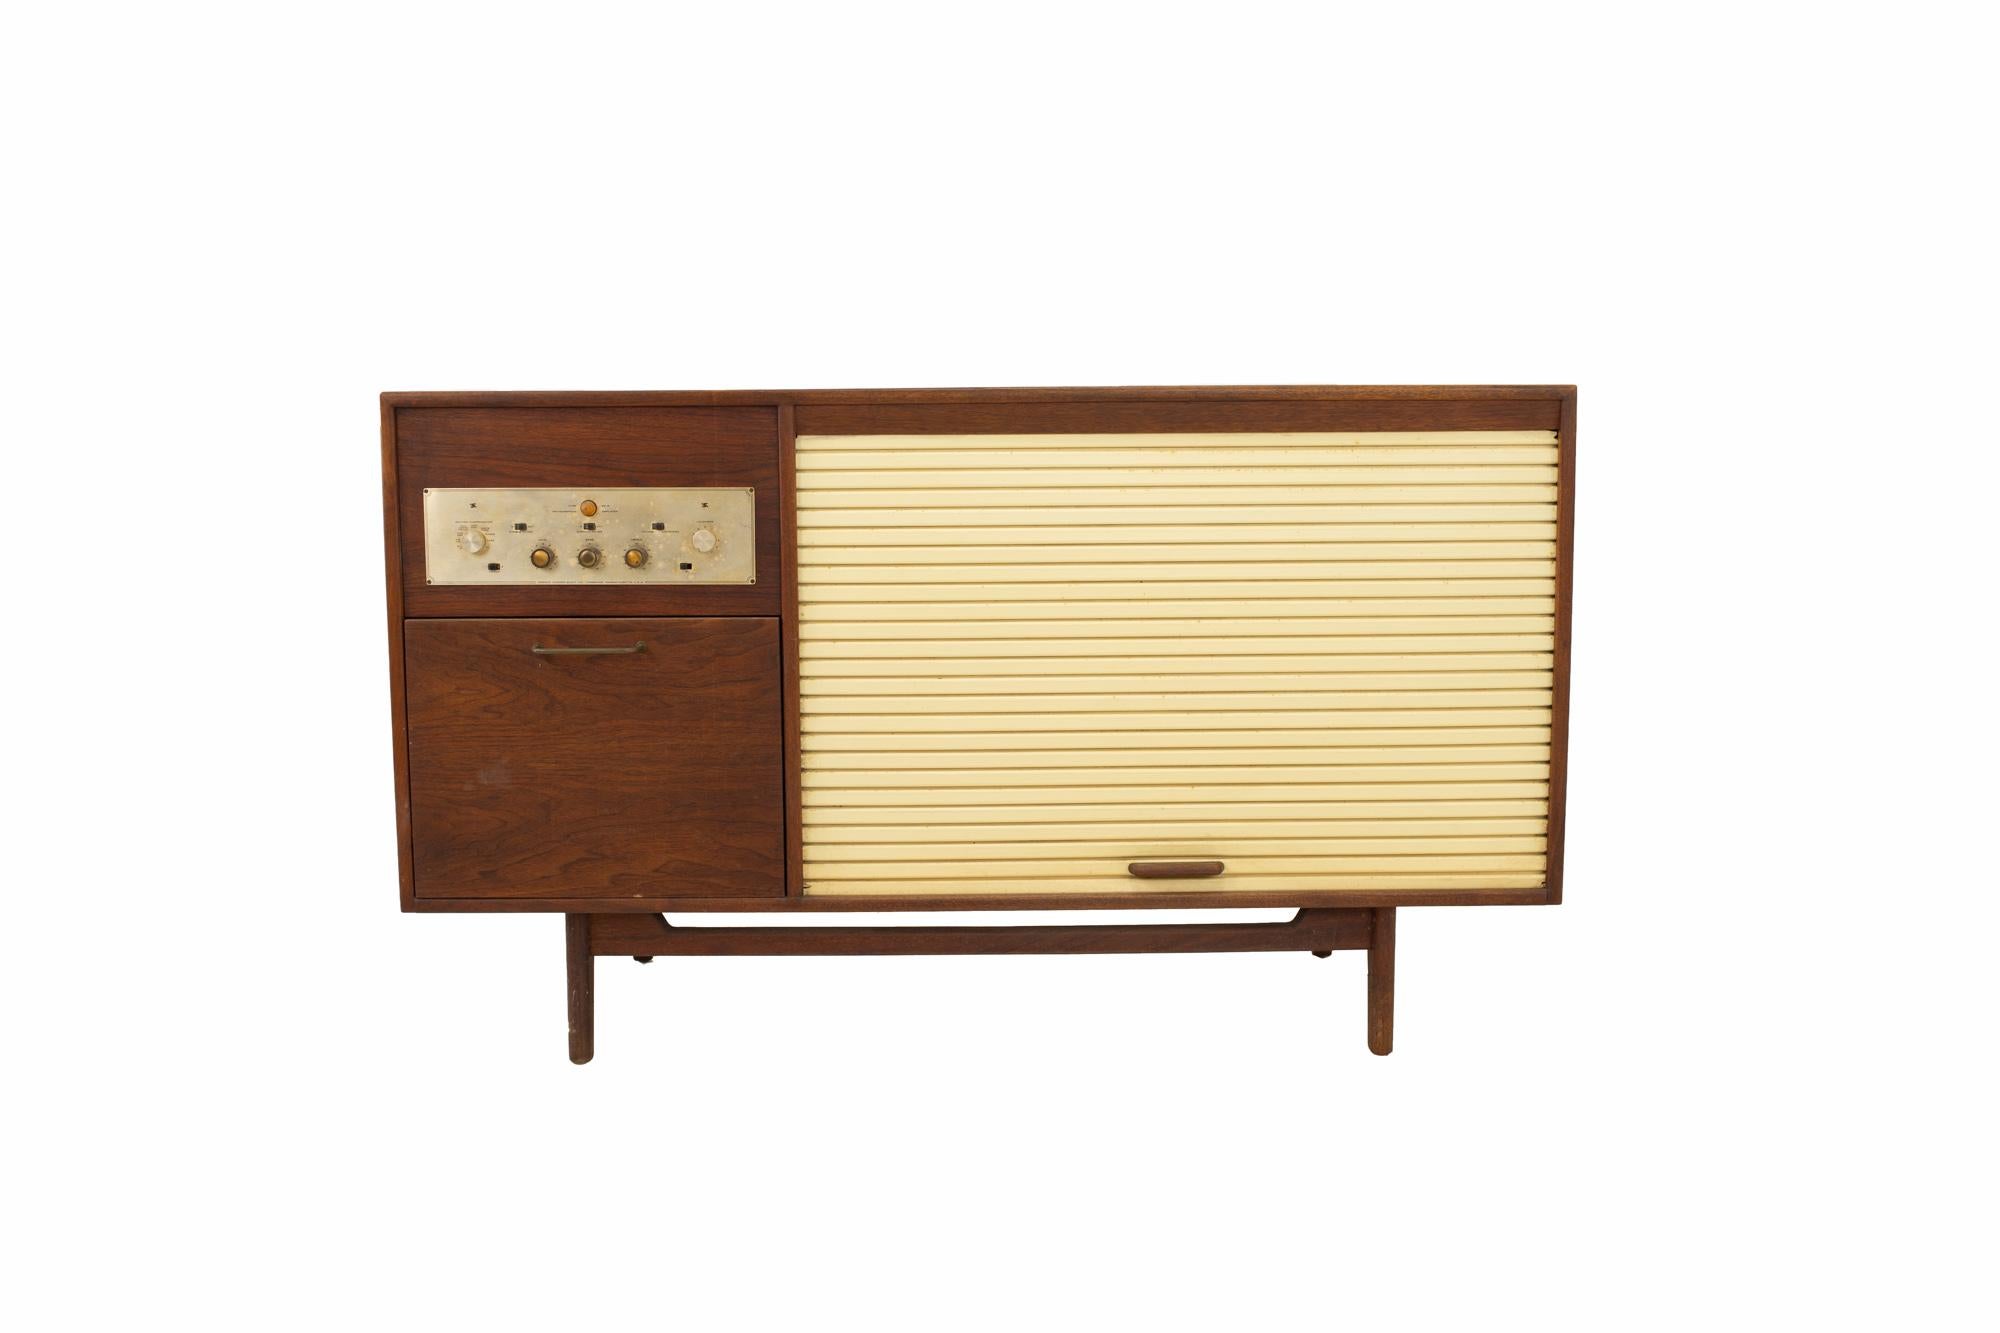 Jens Risom midcentury walnut tambour door stereo console credenza
Credenza measures: 54.25 wide x 21.5 deep x 31.5 high

All pieces of furniture can be had in what we call restored vintage condition. That means the piece is restored upon purchase